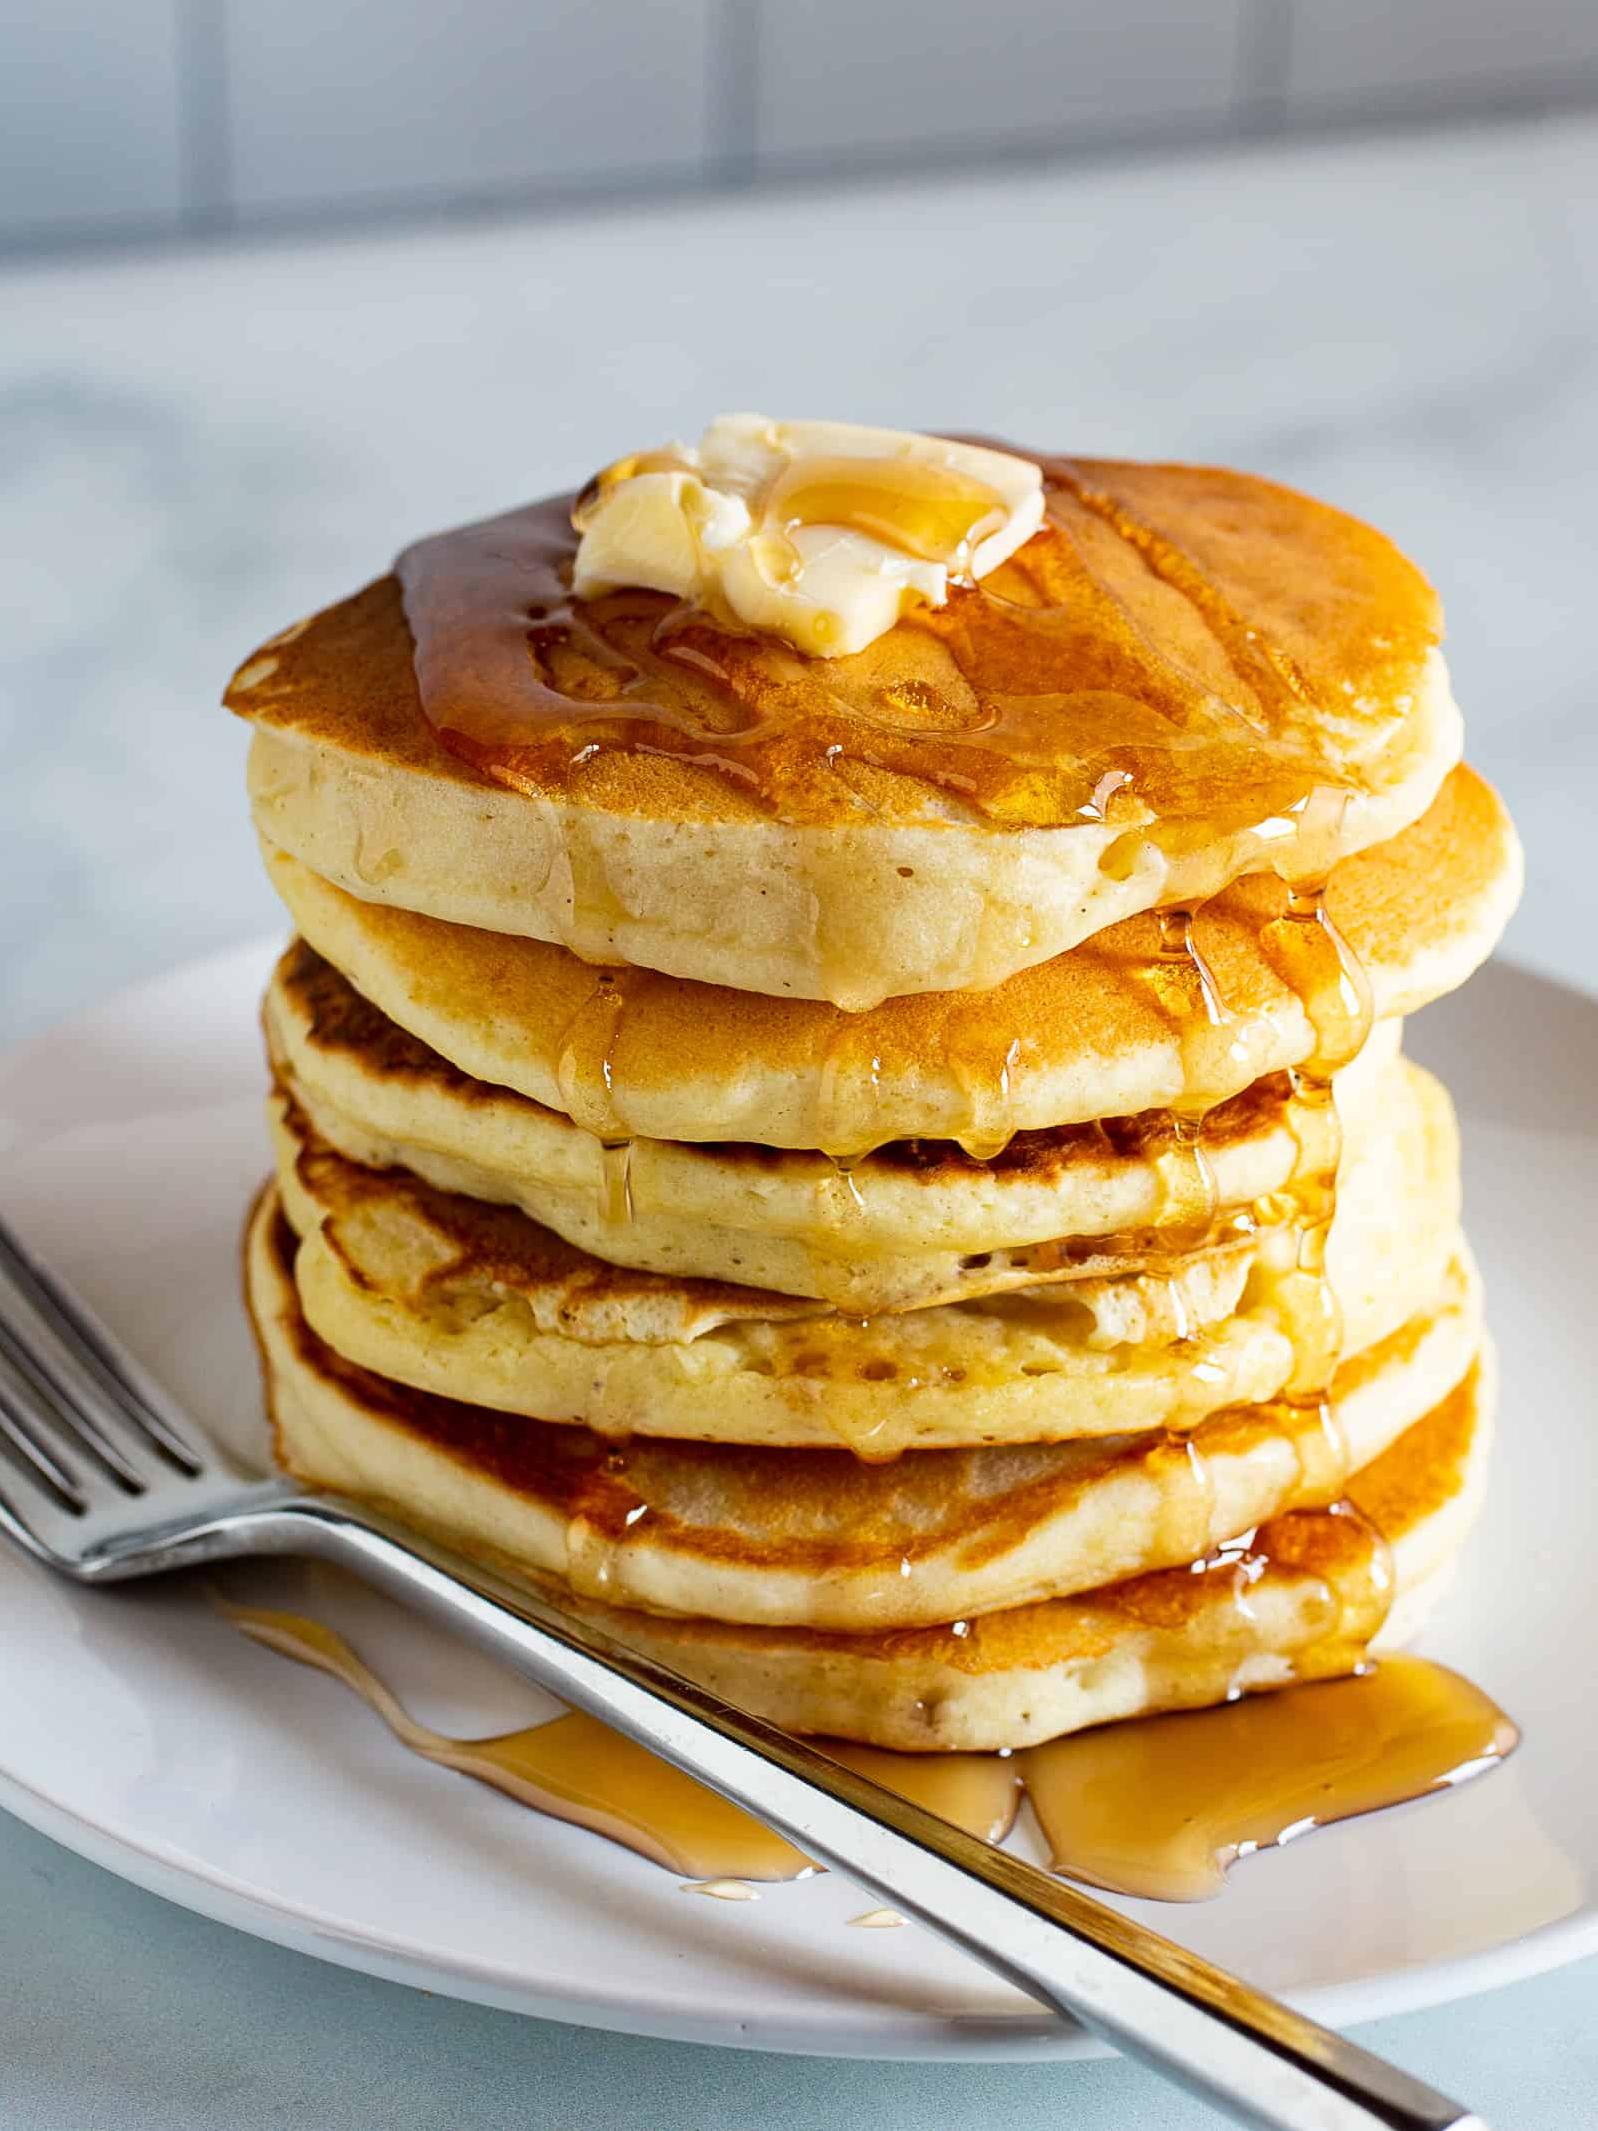  These gluten-free pancakes are definitely stack-worthy!